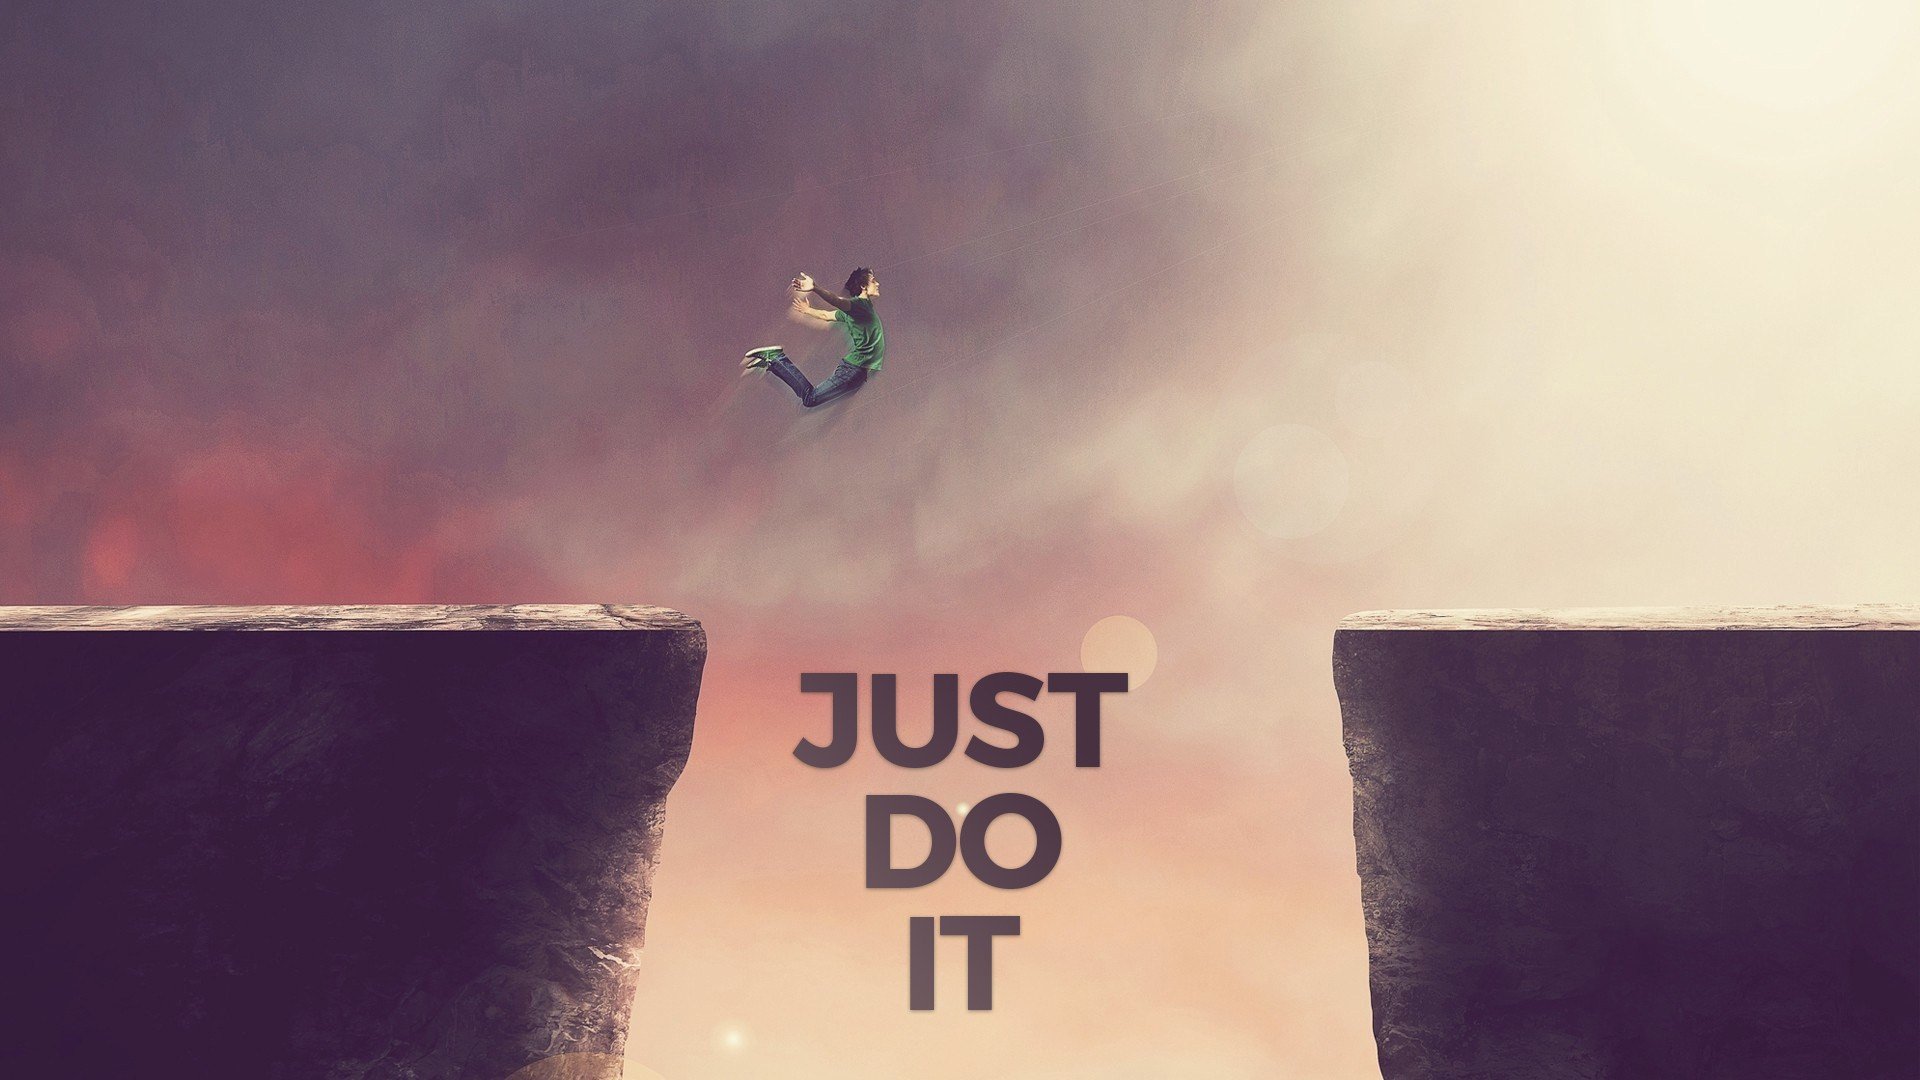 motivational, Nike, Jumping Wallpapers HD / Desktop and Mobile Backgrounds